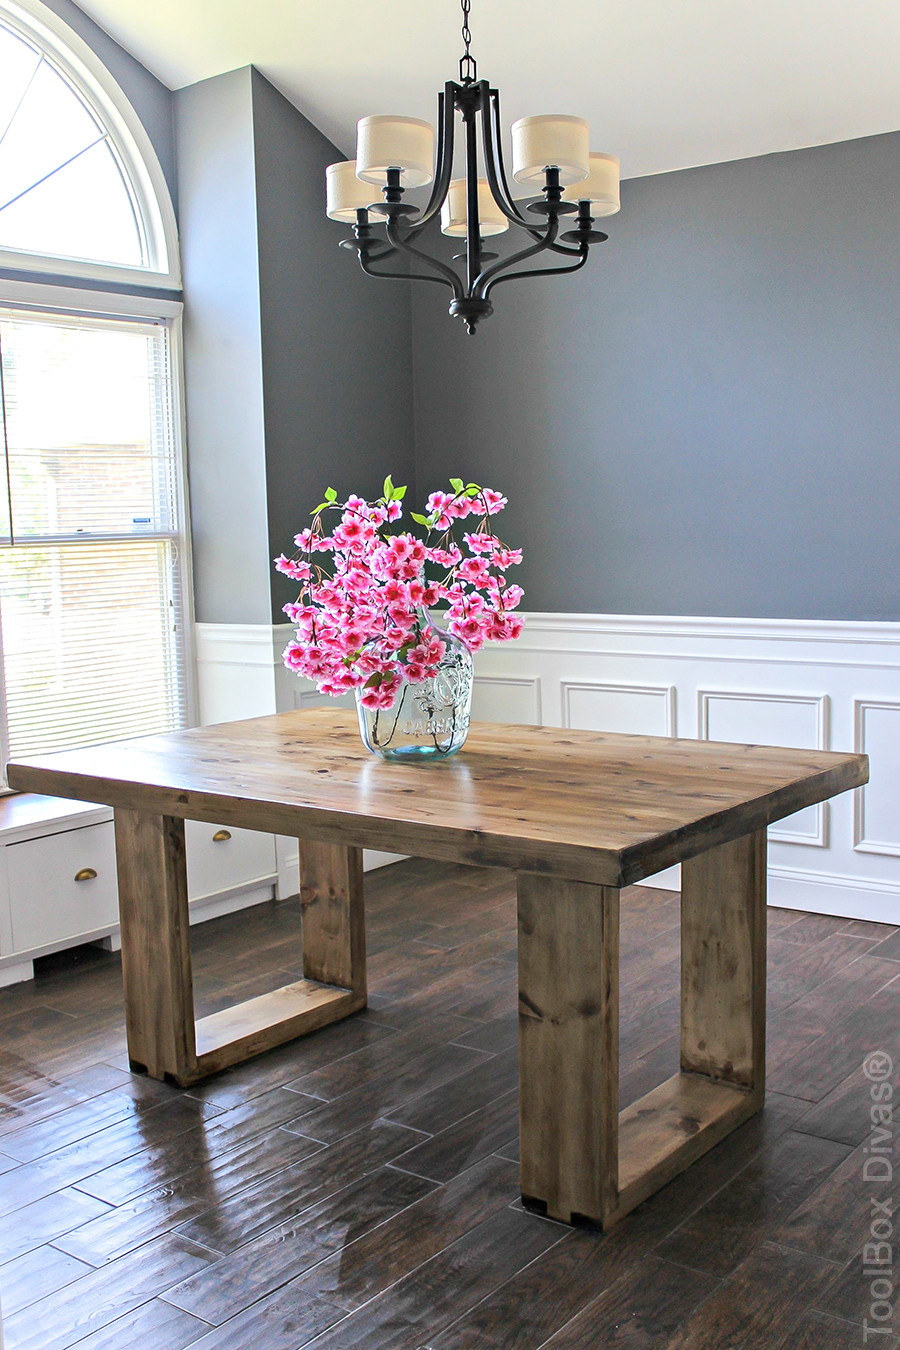 Best ideas about DIY Modern Dining Table
. Save or Pin DIY Husky Modern Dining Table Now.